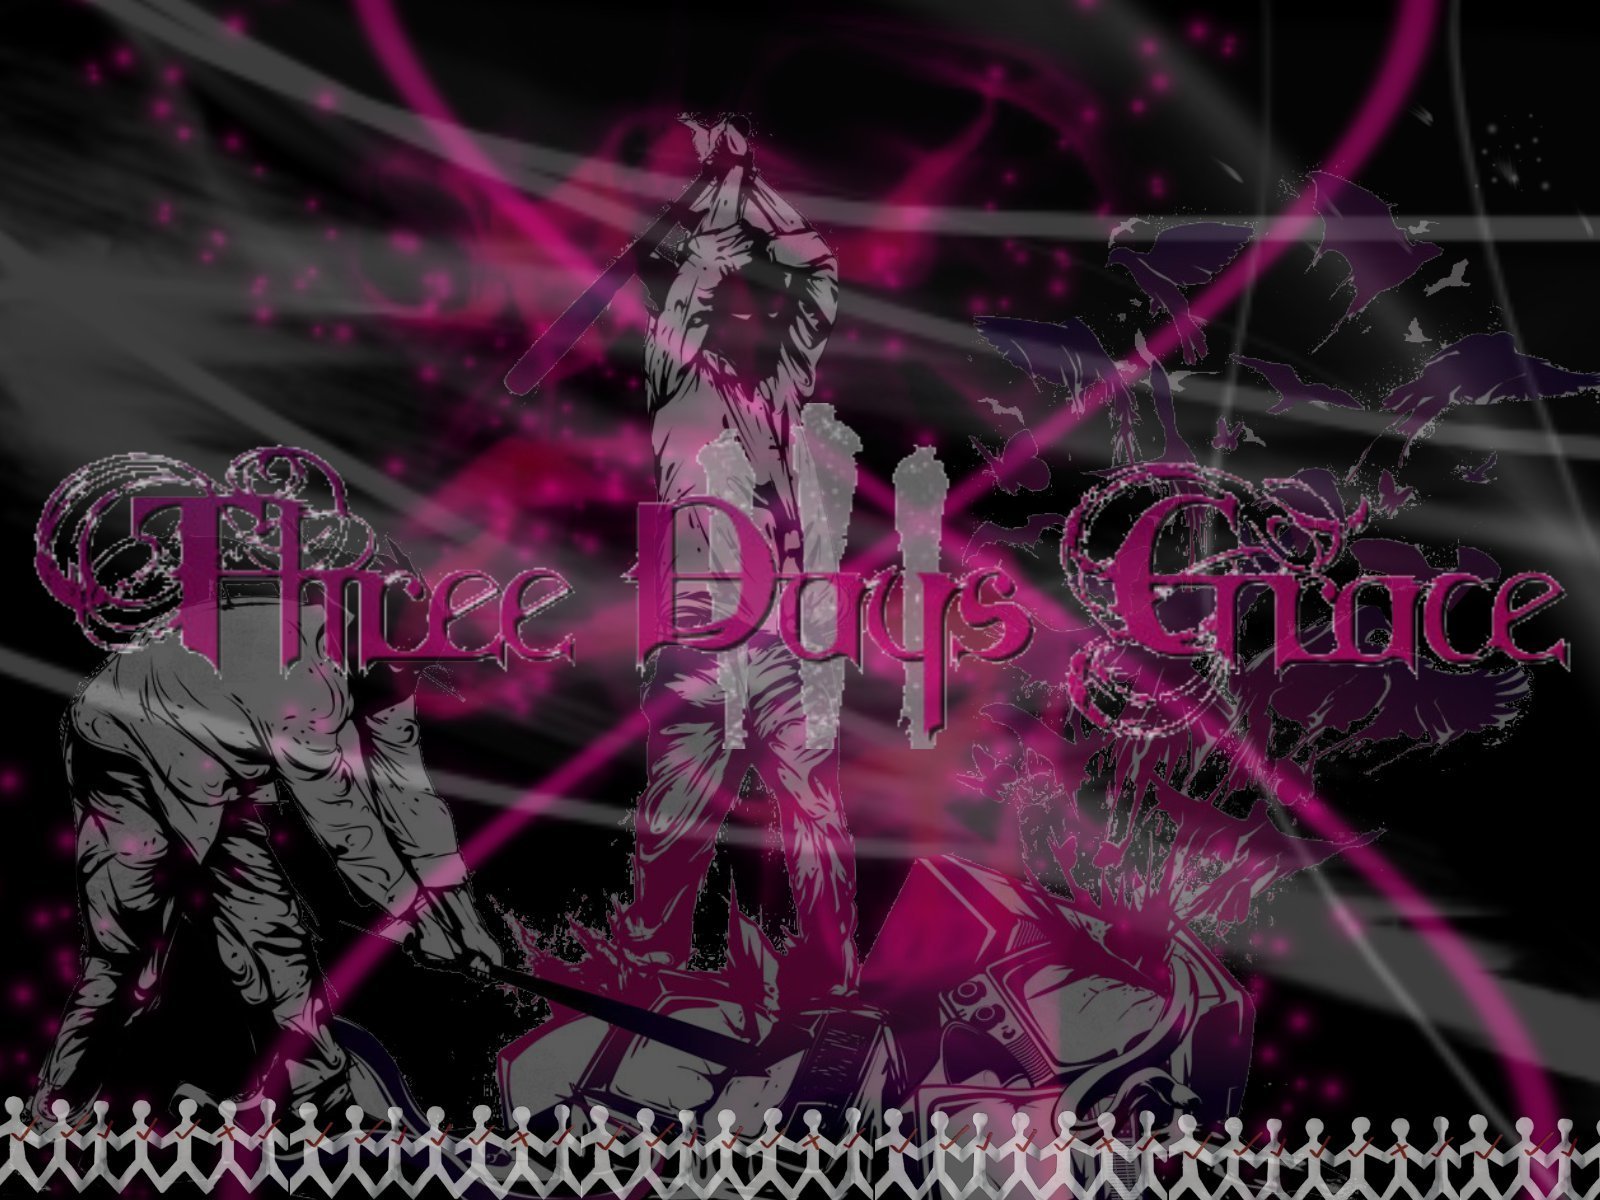 Three Days Grace Image HD Wallpaper And